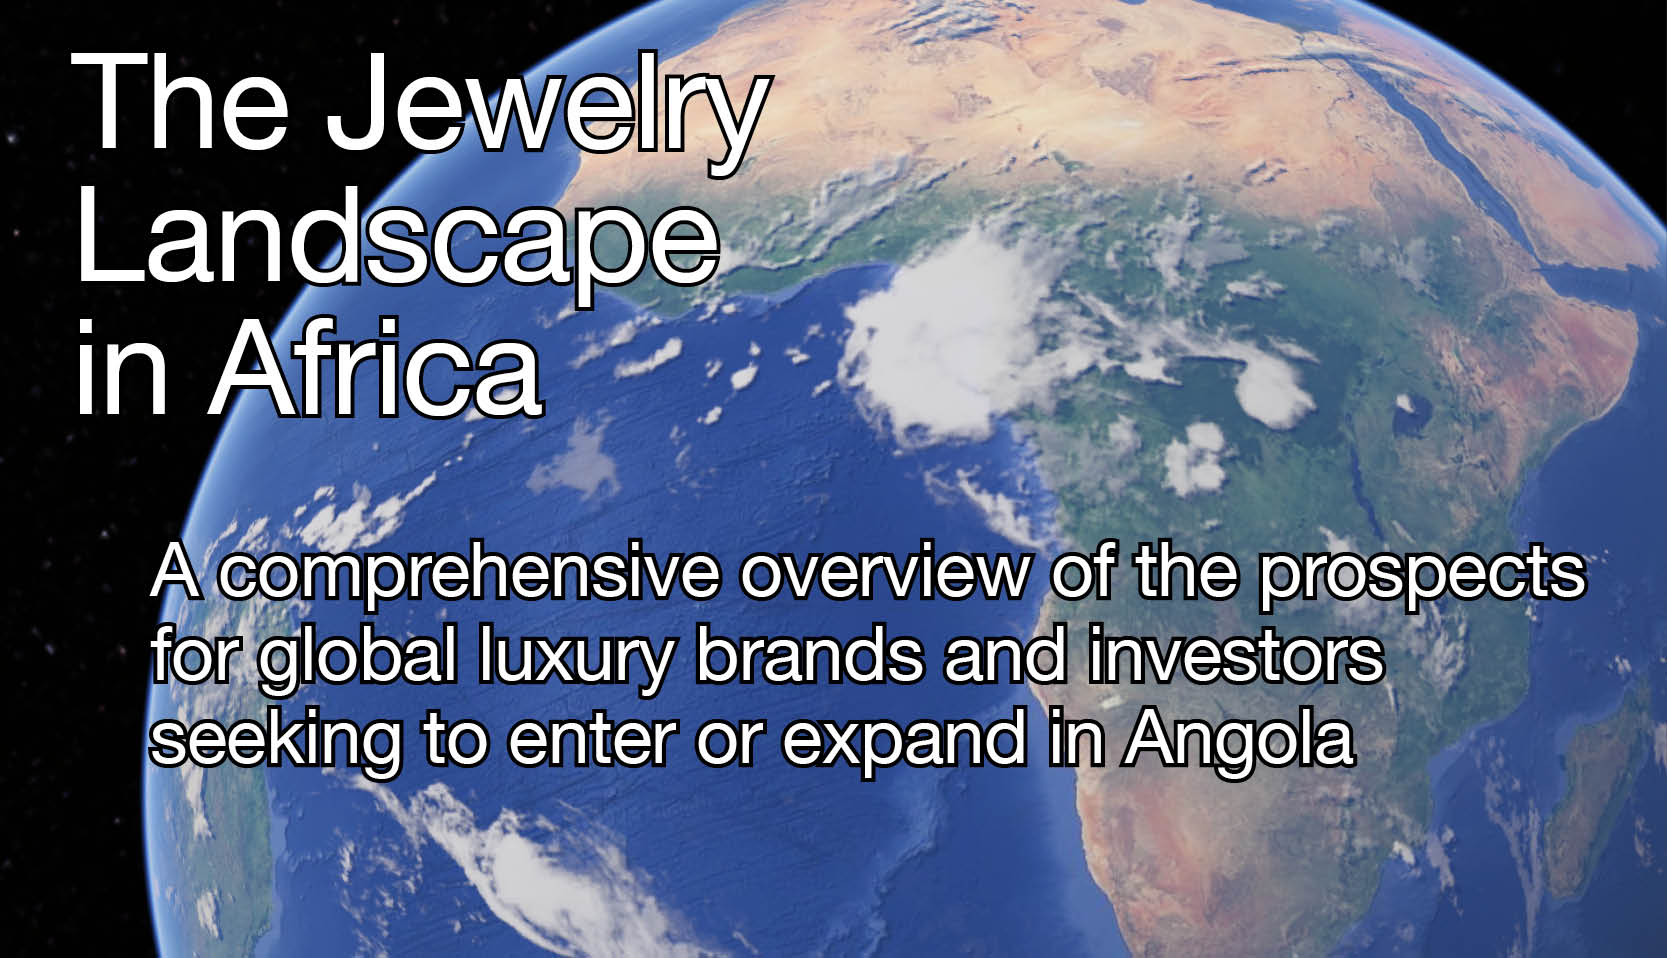 The Jewelry Landscape in Africa